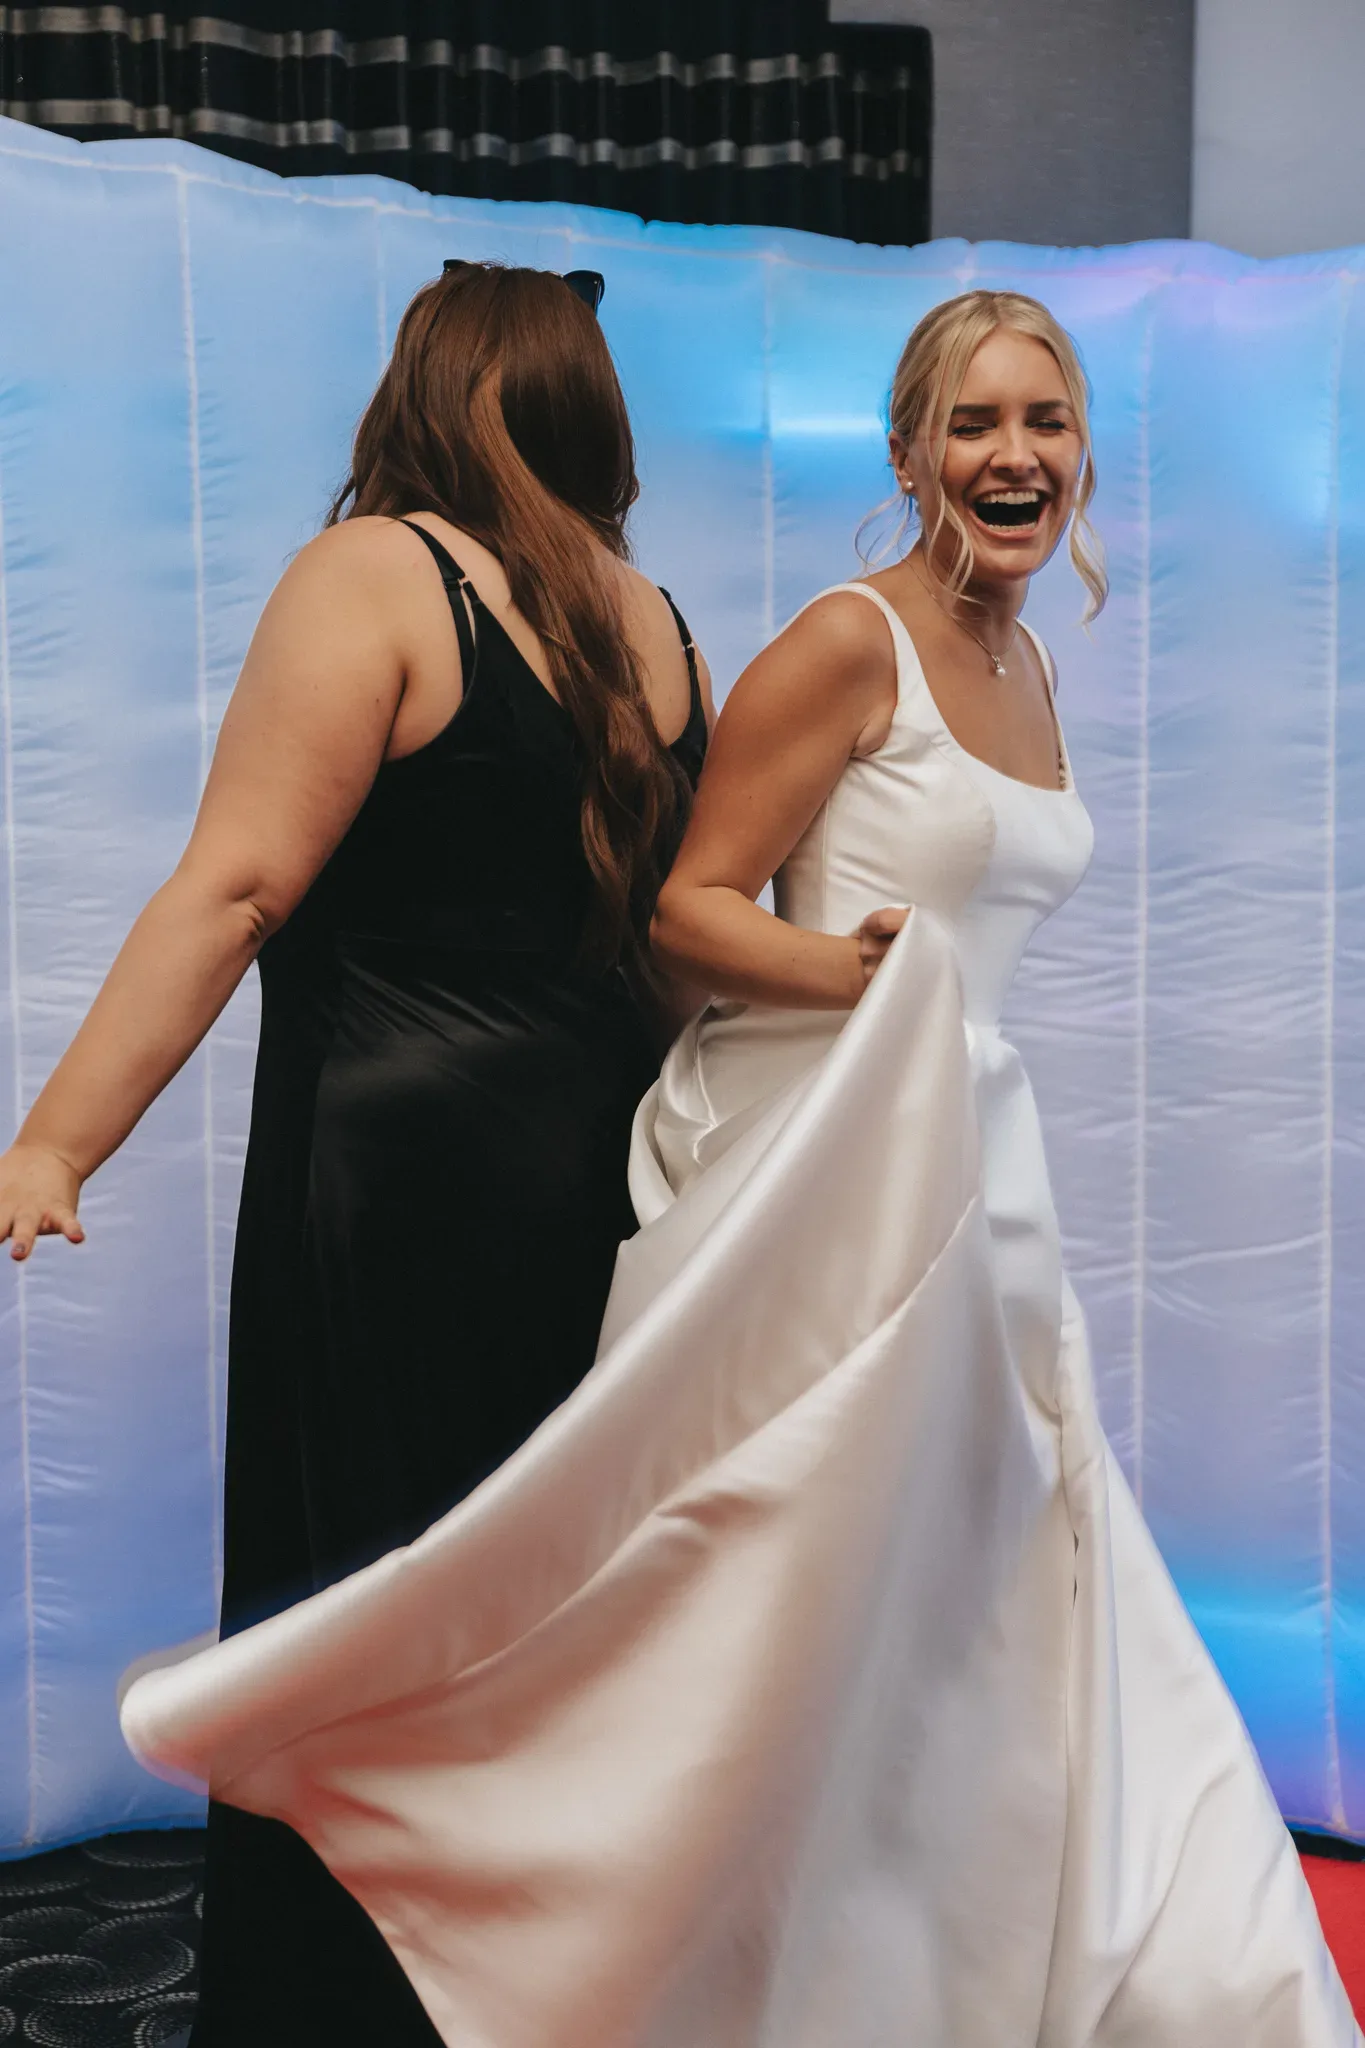 Two women dancing joyfully at an event. the woman on the right, dressed in a white gown, laughs while holding her dress, and the woman on the left, in a black dress, dances beside her.